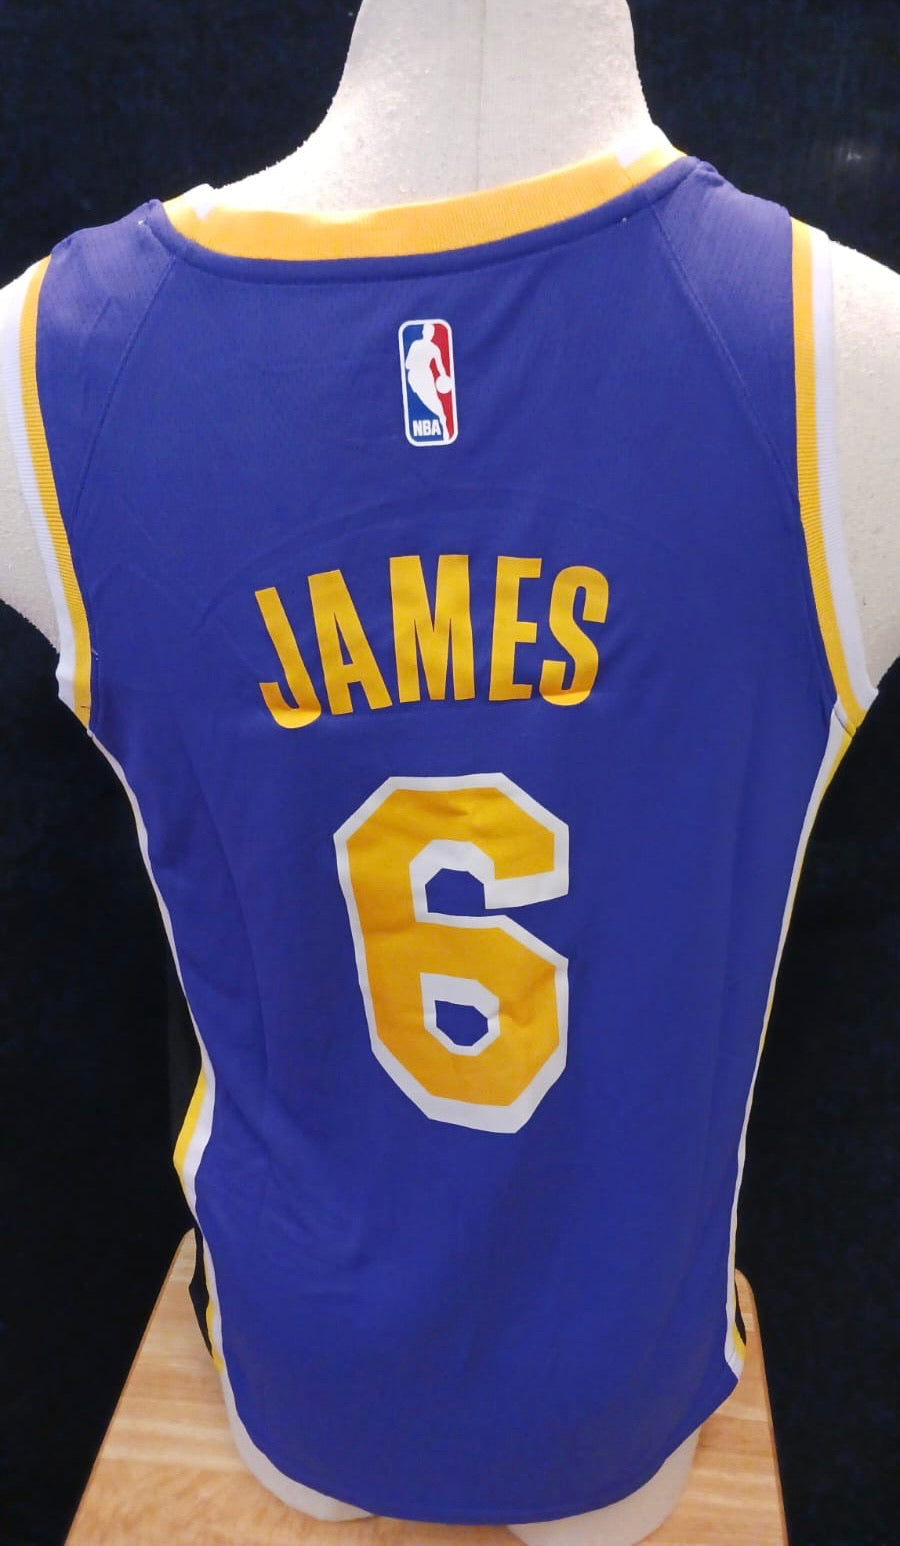 lebron james lakers jersey number 6